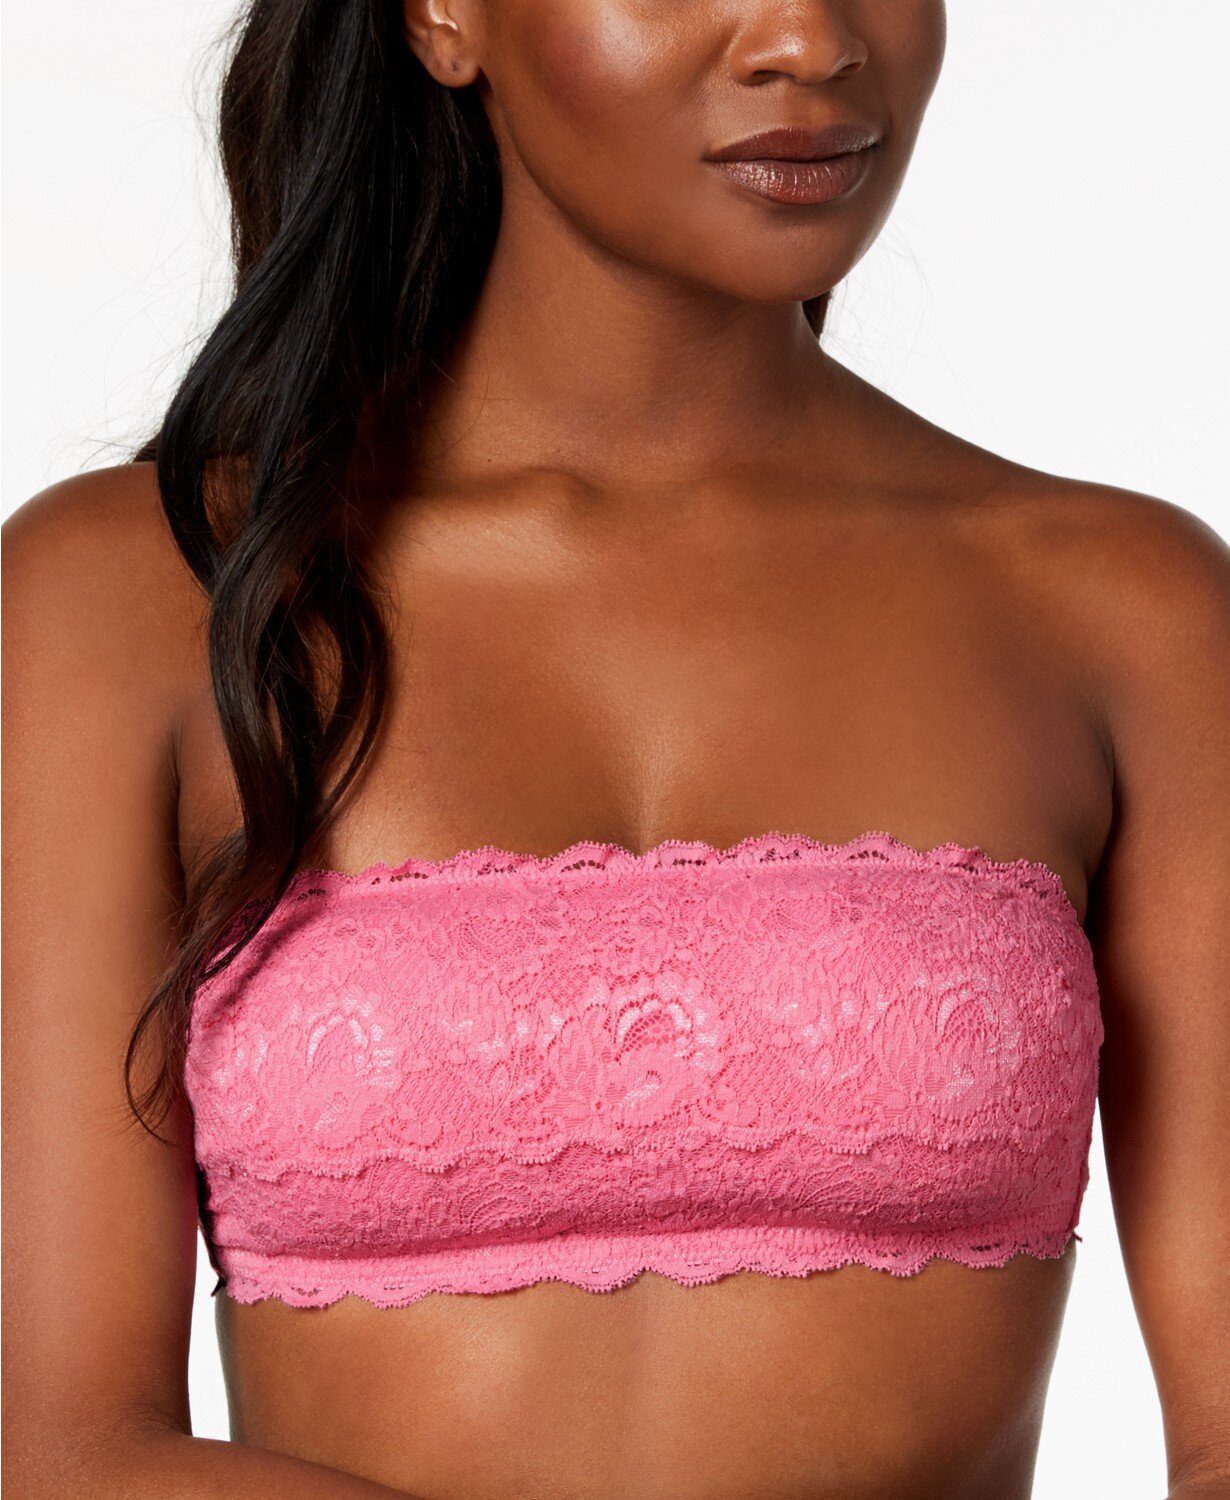 Lace Boob Tube Top Sexy Pastel Pink Strapless Bra BANDEAU Lingerie Dancer  B90